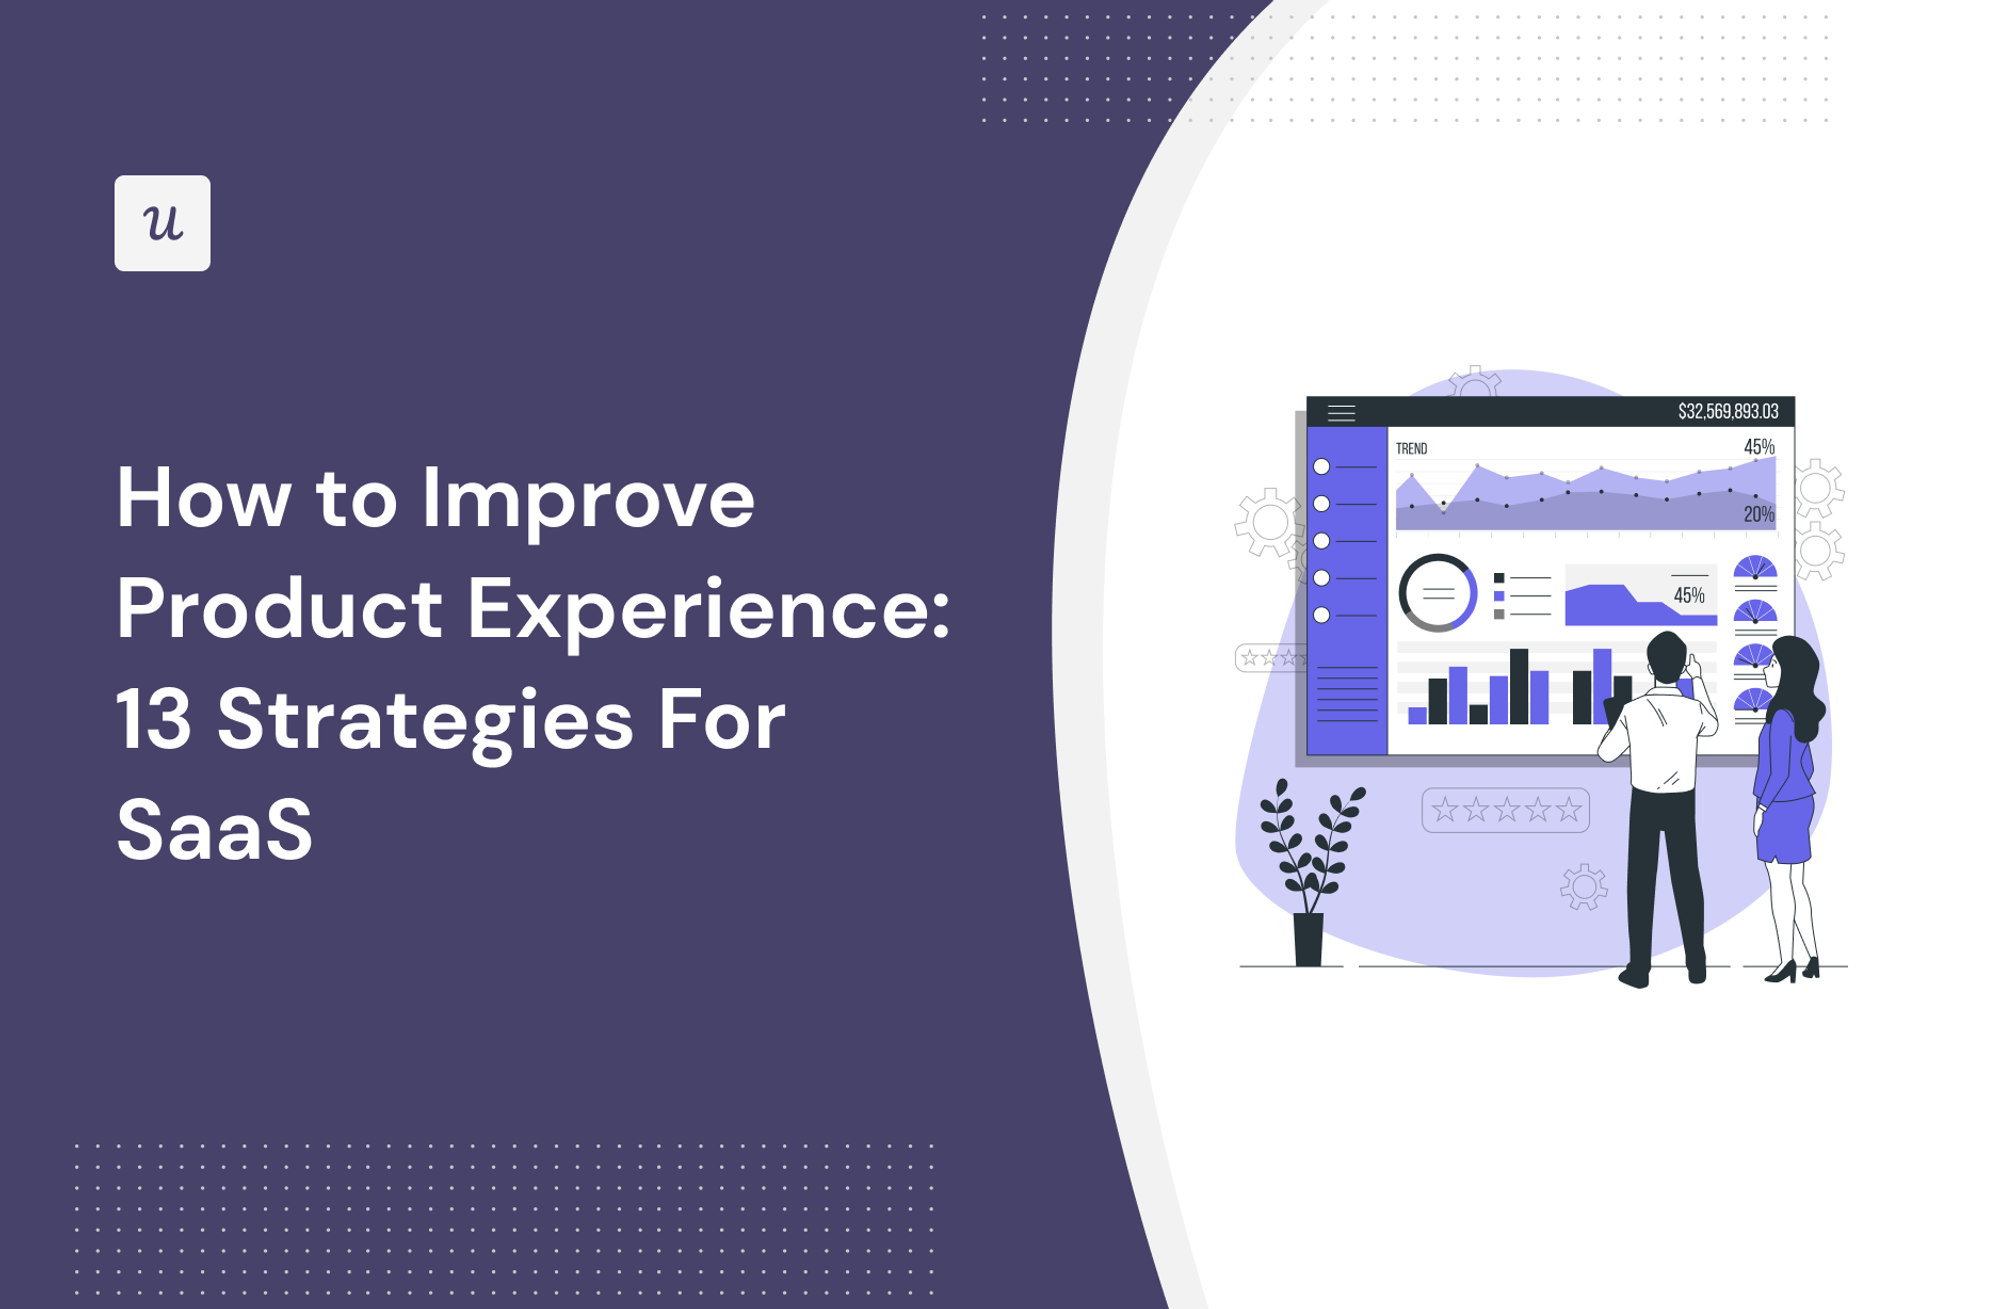 how to improve product experience - featured snippet